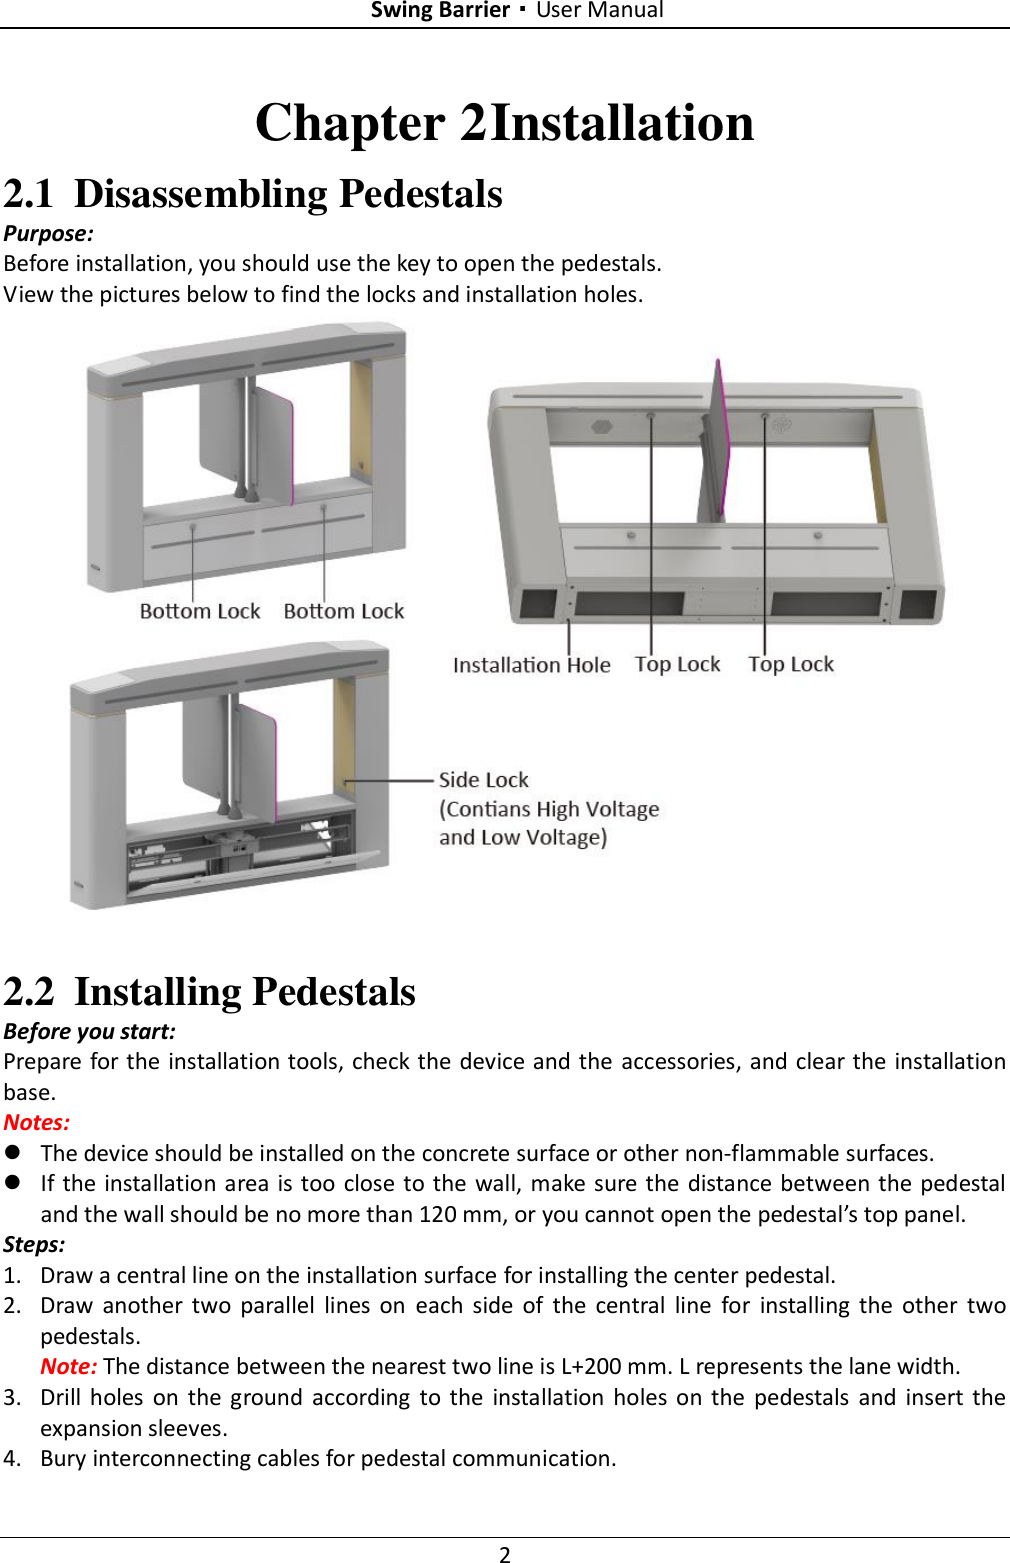 Swing Barrier·User Manual 2 Chapter 2 Installation 2.1 Disassembling Pedestals Purpose: Before installation, you should use the key to open the pedestals. View the pictures below to find the locks and installation holes.   2.2 Installing Pedestals Before you start: Prepare for the installation tools, check the device and the  accessories, and clear the installation base. Notes:    The device should be installed on the concrete surface or other non-flammable surfaces.  If the installation area is too close to the wall, make sure the distance between the pedestal and the wall should be no more than 120 mm, or you cannot open the pedestal’s top panel. Steps: 1. Draw a central line on the installation surface for installing the center pedestal. 2. Draw  another  two  parallel  lines  on  each  side  of  the  central  line  for  installing  the  other  two pedestals. Note: The distance between the nearest two line is L+200 mm. L represents the lane width. 3. Drill  holes  on  the ground  according  to the  installation  holes on the  pedestals  and  insert  the expansion sleeves. 4. Bury interconnecting cables for pedestal communication. 